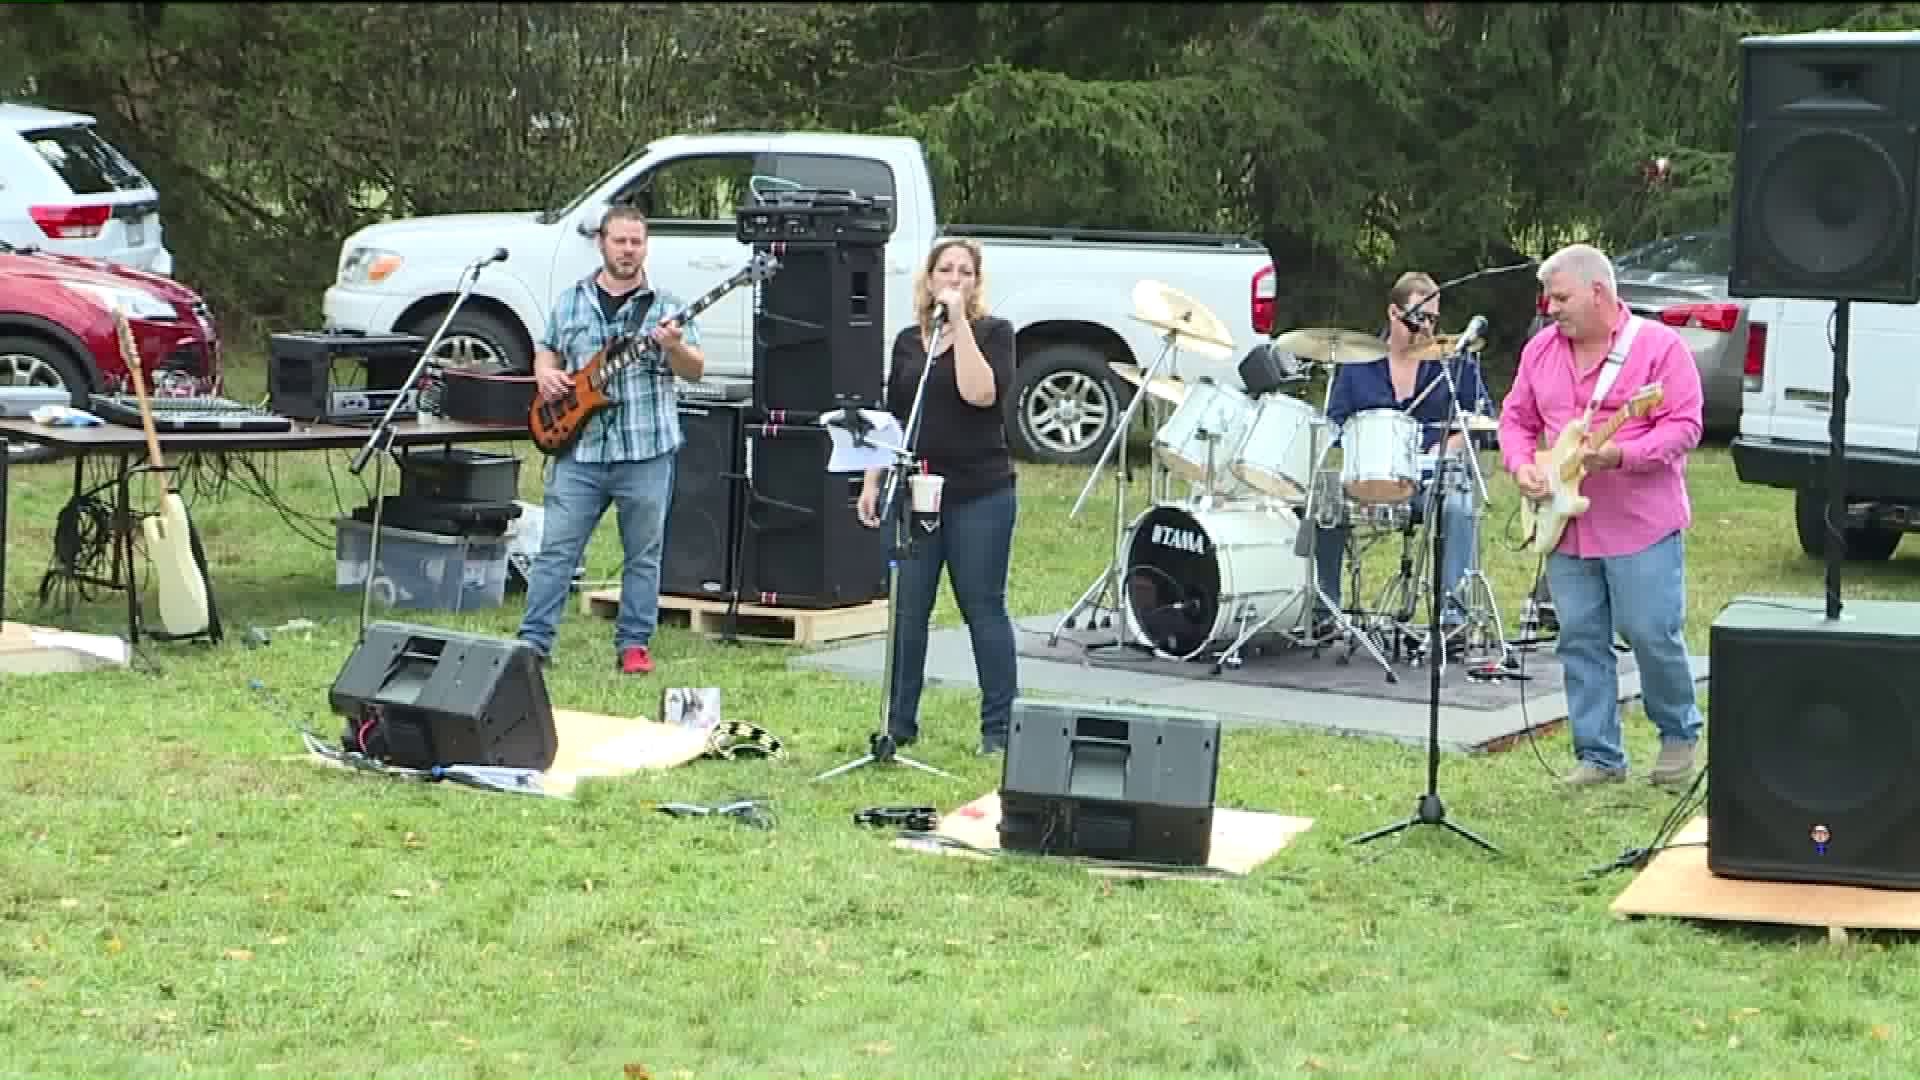 Benefit for Family Hit by Car